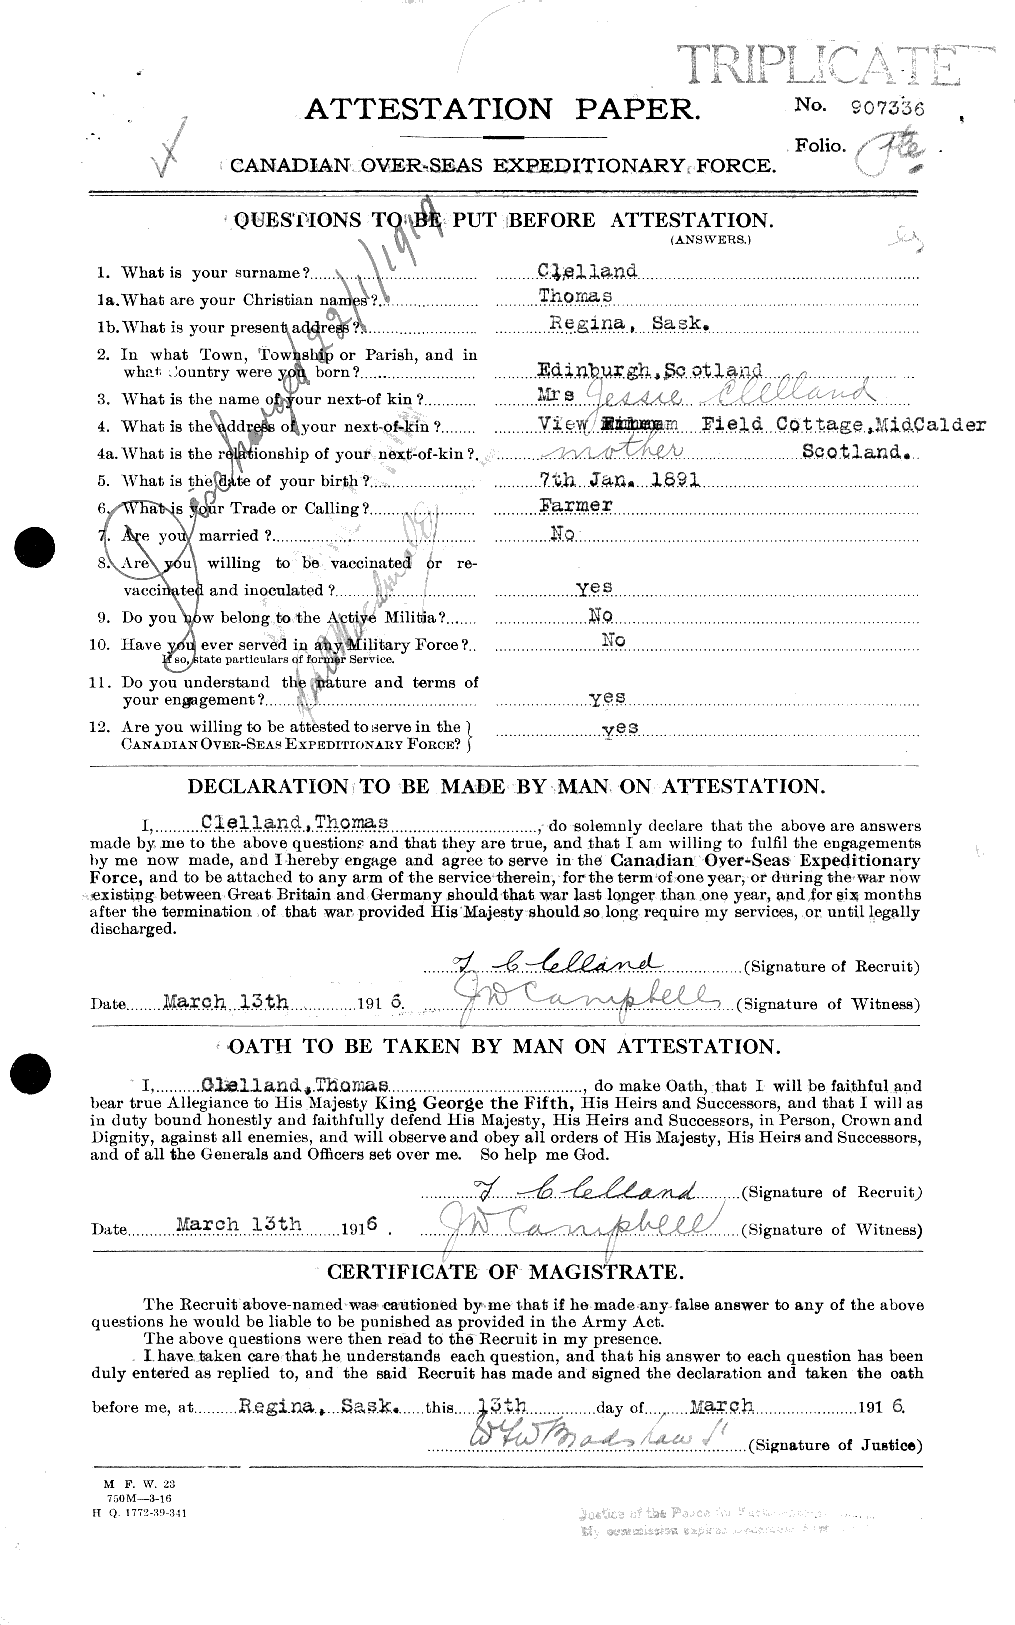 Personnel Records of the First World War - CEF 023769a